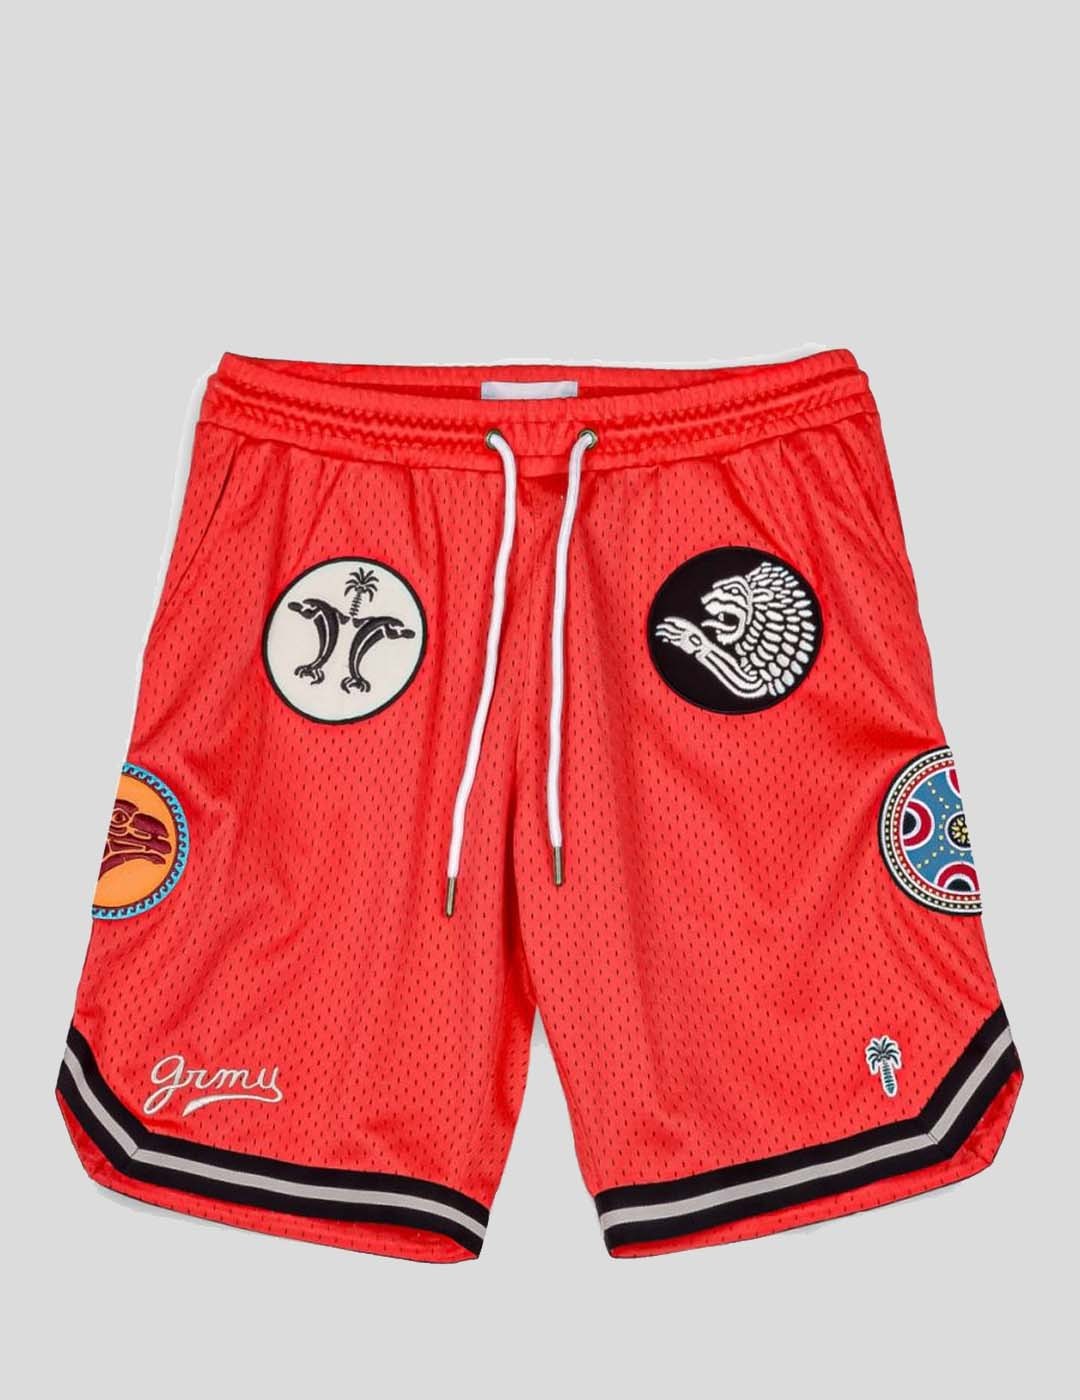 SHORTS GRIMEY THE CLOUT MESH BASKET SHORTS  RED